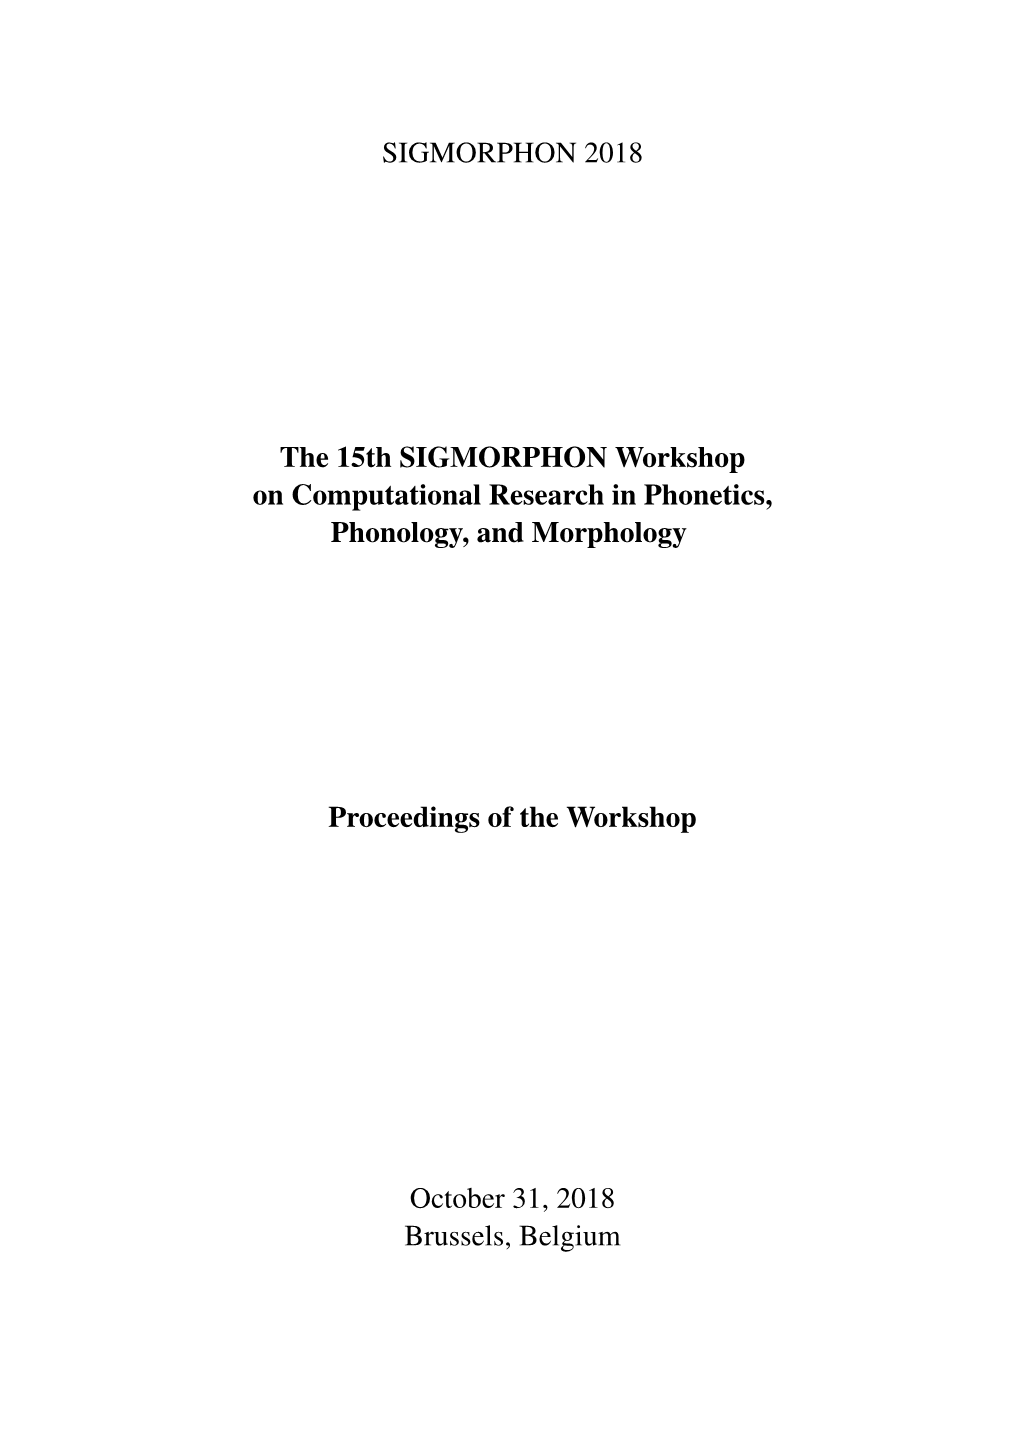 Proceedings of the 15Th SIGMORPHON Workshop on Computational Research in Phonetics, Phonology, and Morphology, Pages 1–10 Brussels, Belgium, October 31, 2018